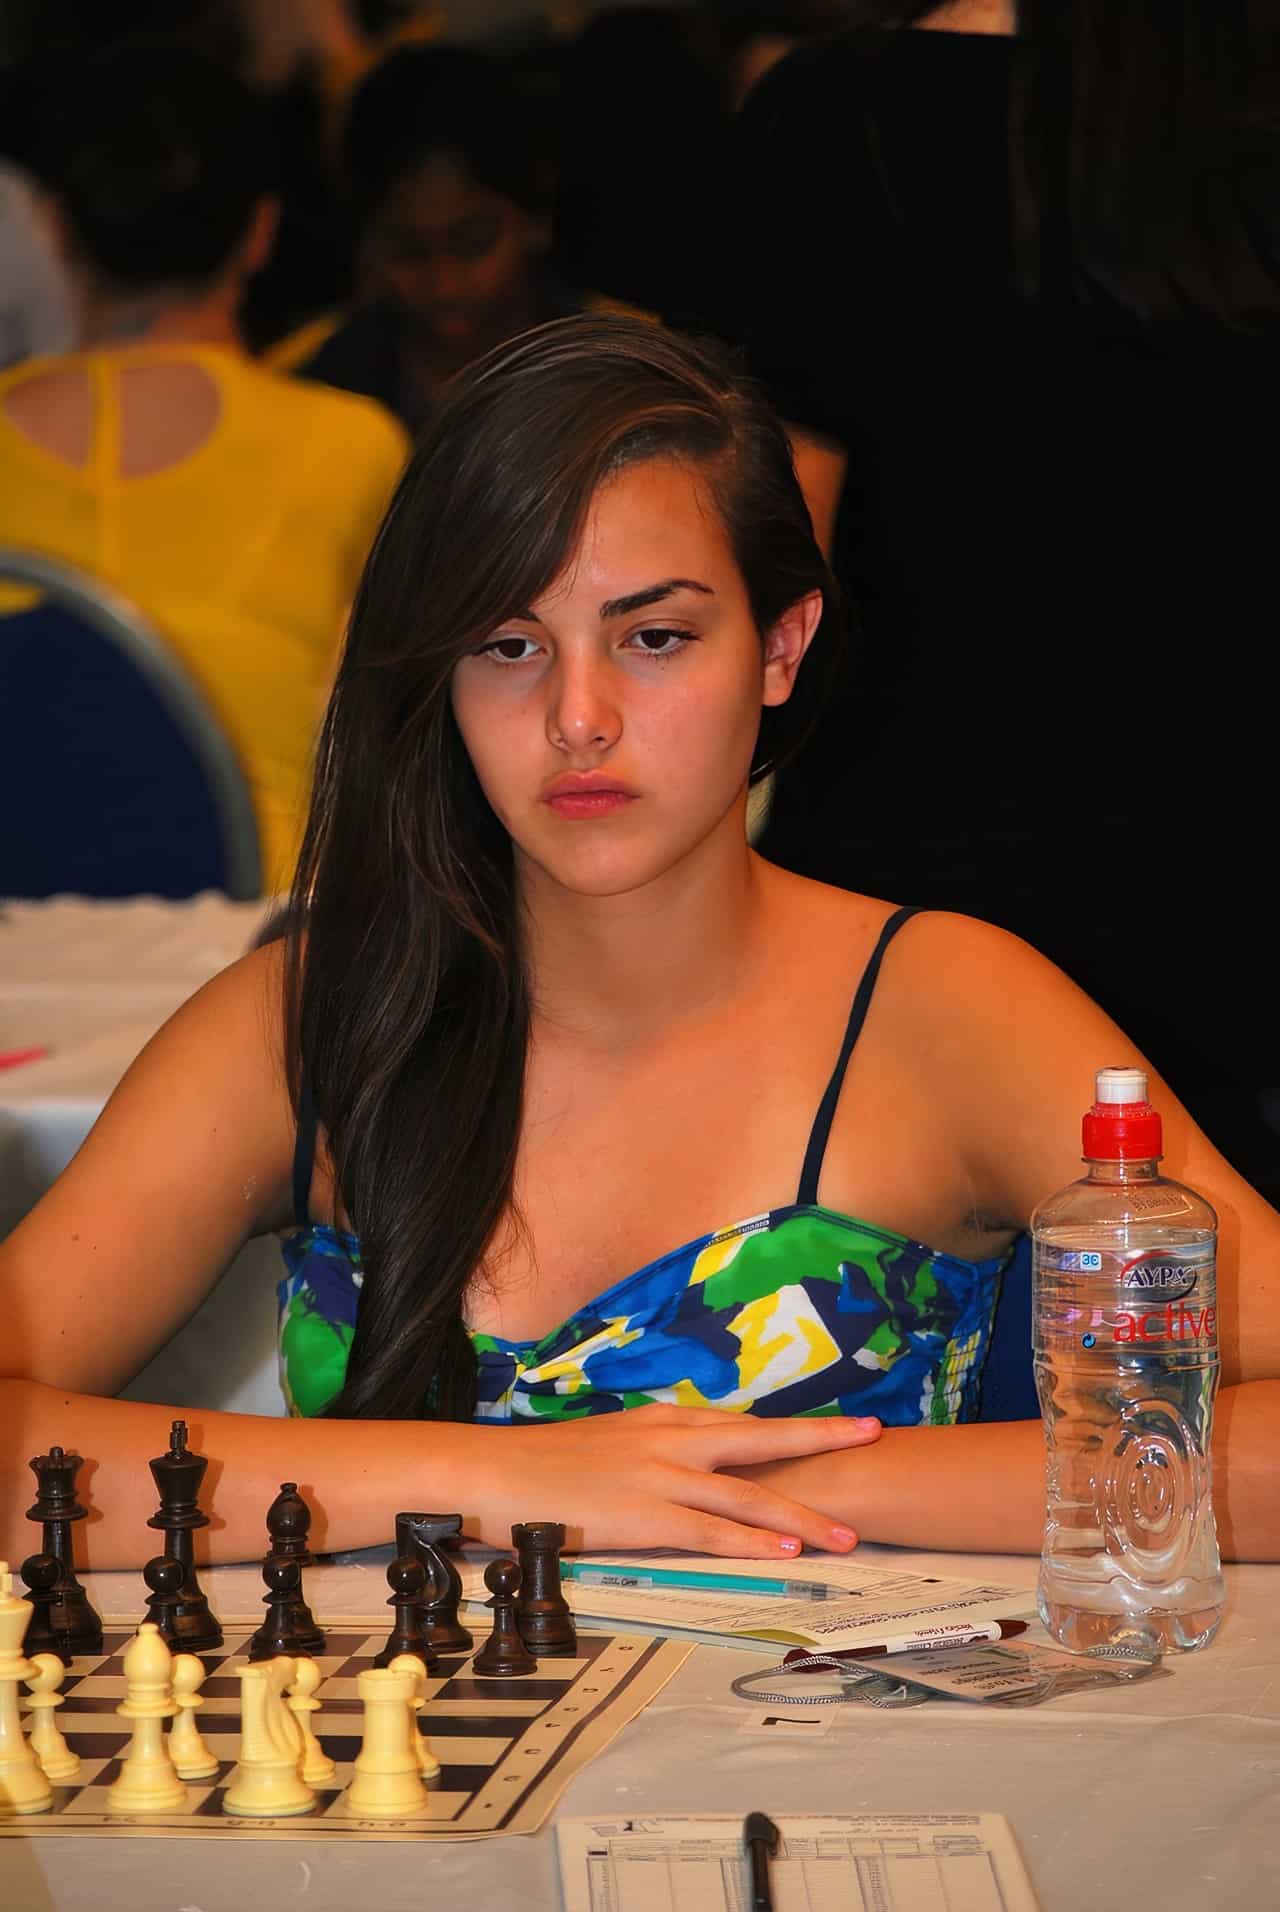 Isolated Queens: US Chess Women and Botez Live Host 2K Saturday